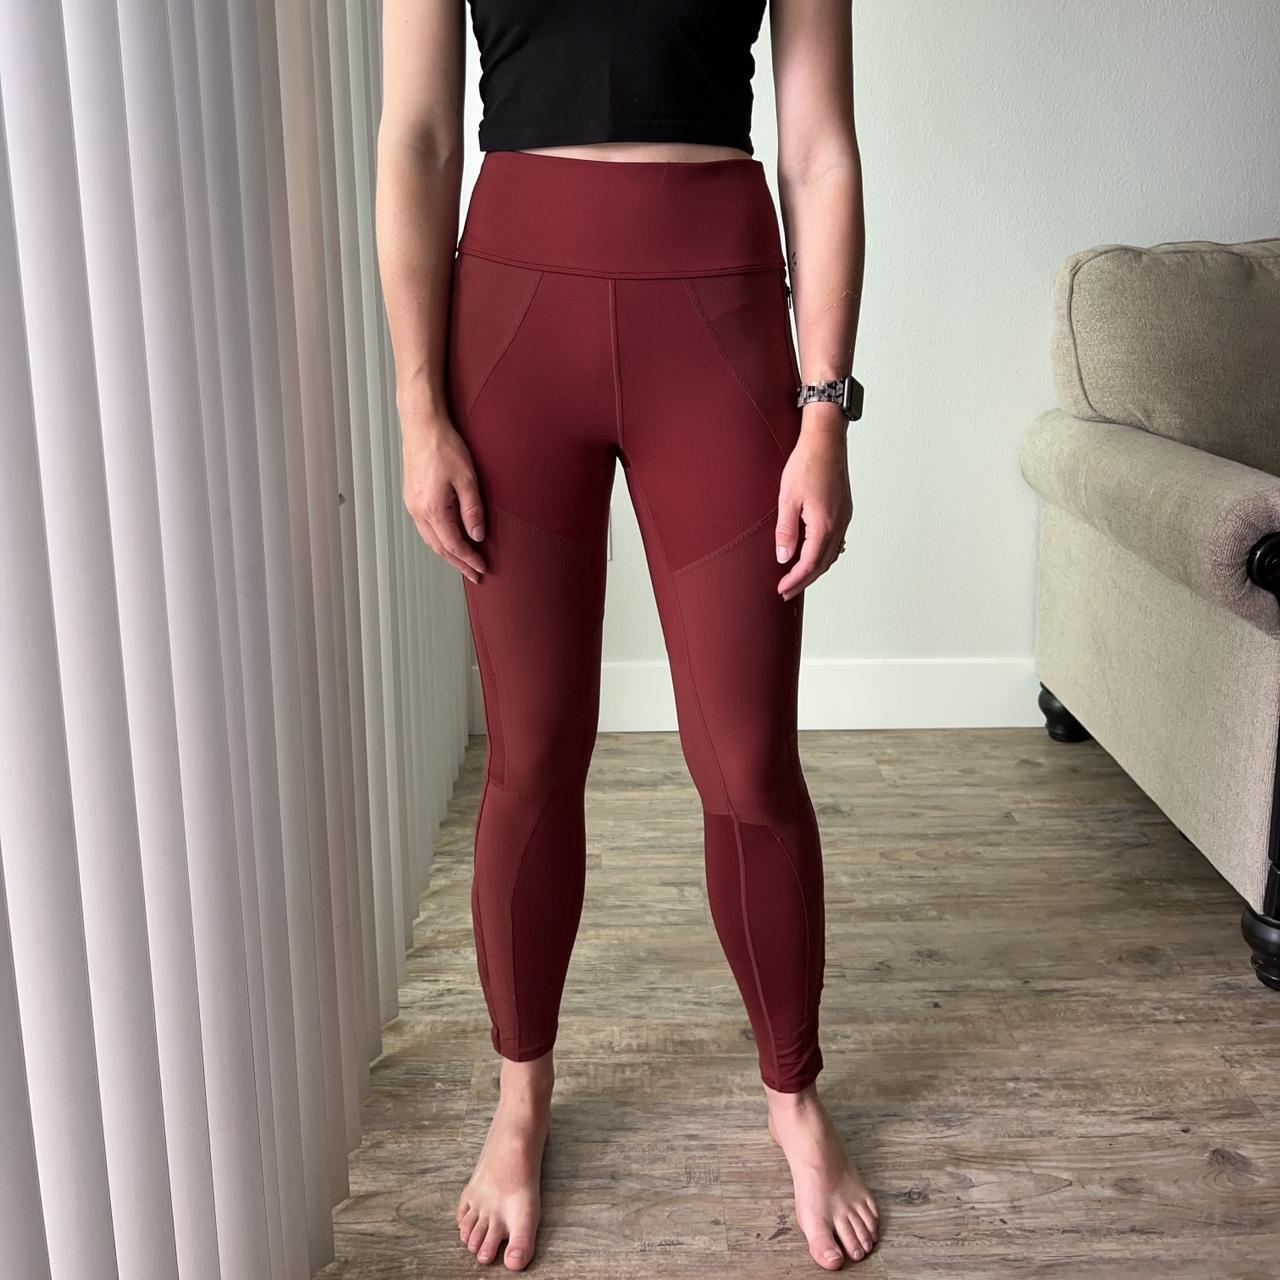 The Born to Run leggings from Free People Movement - Depop